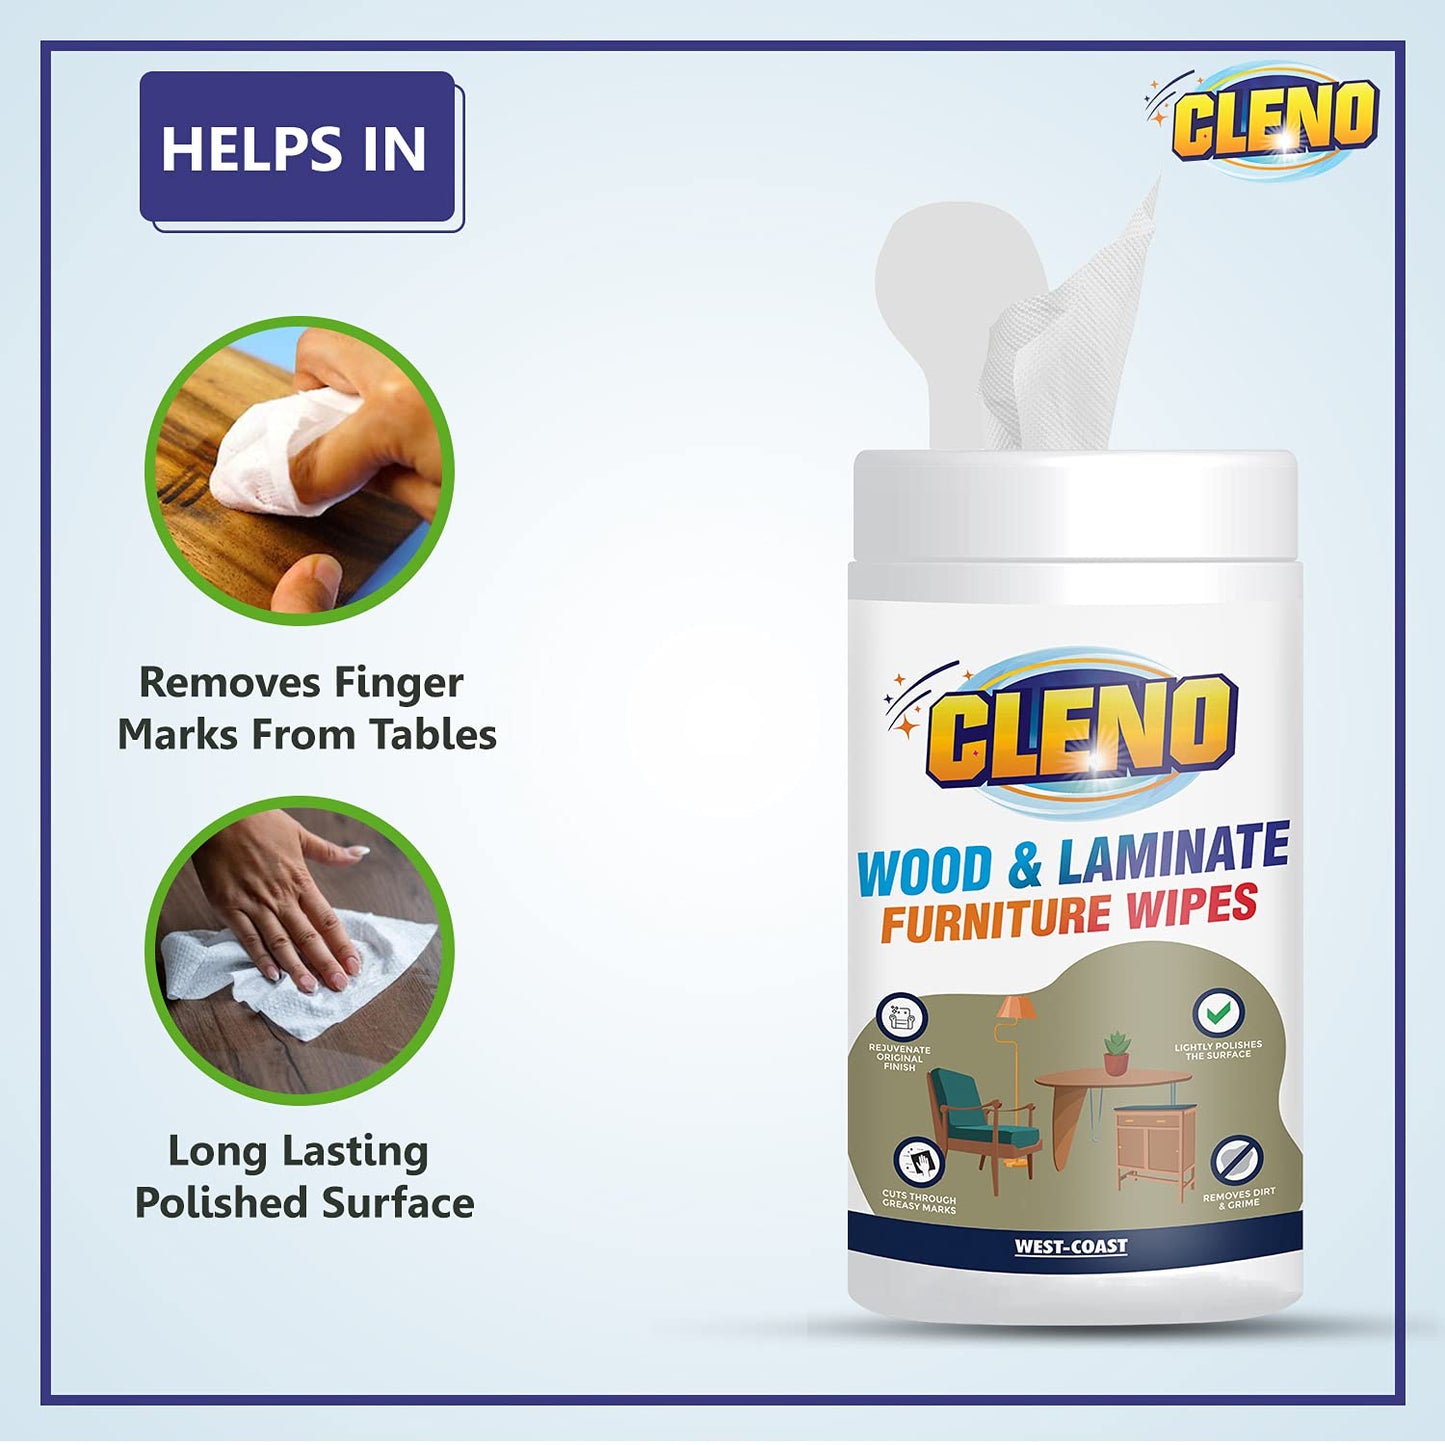 Cleno Wood  Laminate Furniture Wet Wipes Clean Restore Polish  Protects TablesChairsCupboardBedroom FurnitureCabinetsBenchesDoorsDesksAll Types of Furniture - 50 Wipes Ready to Use